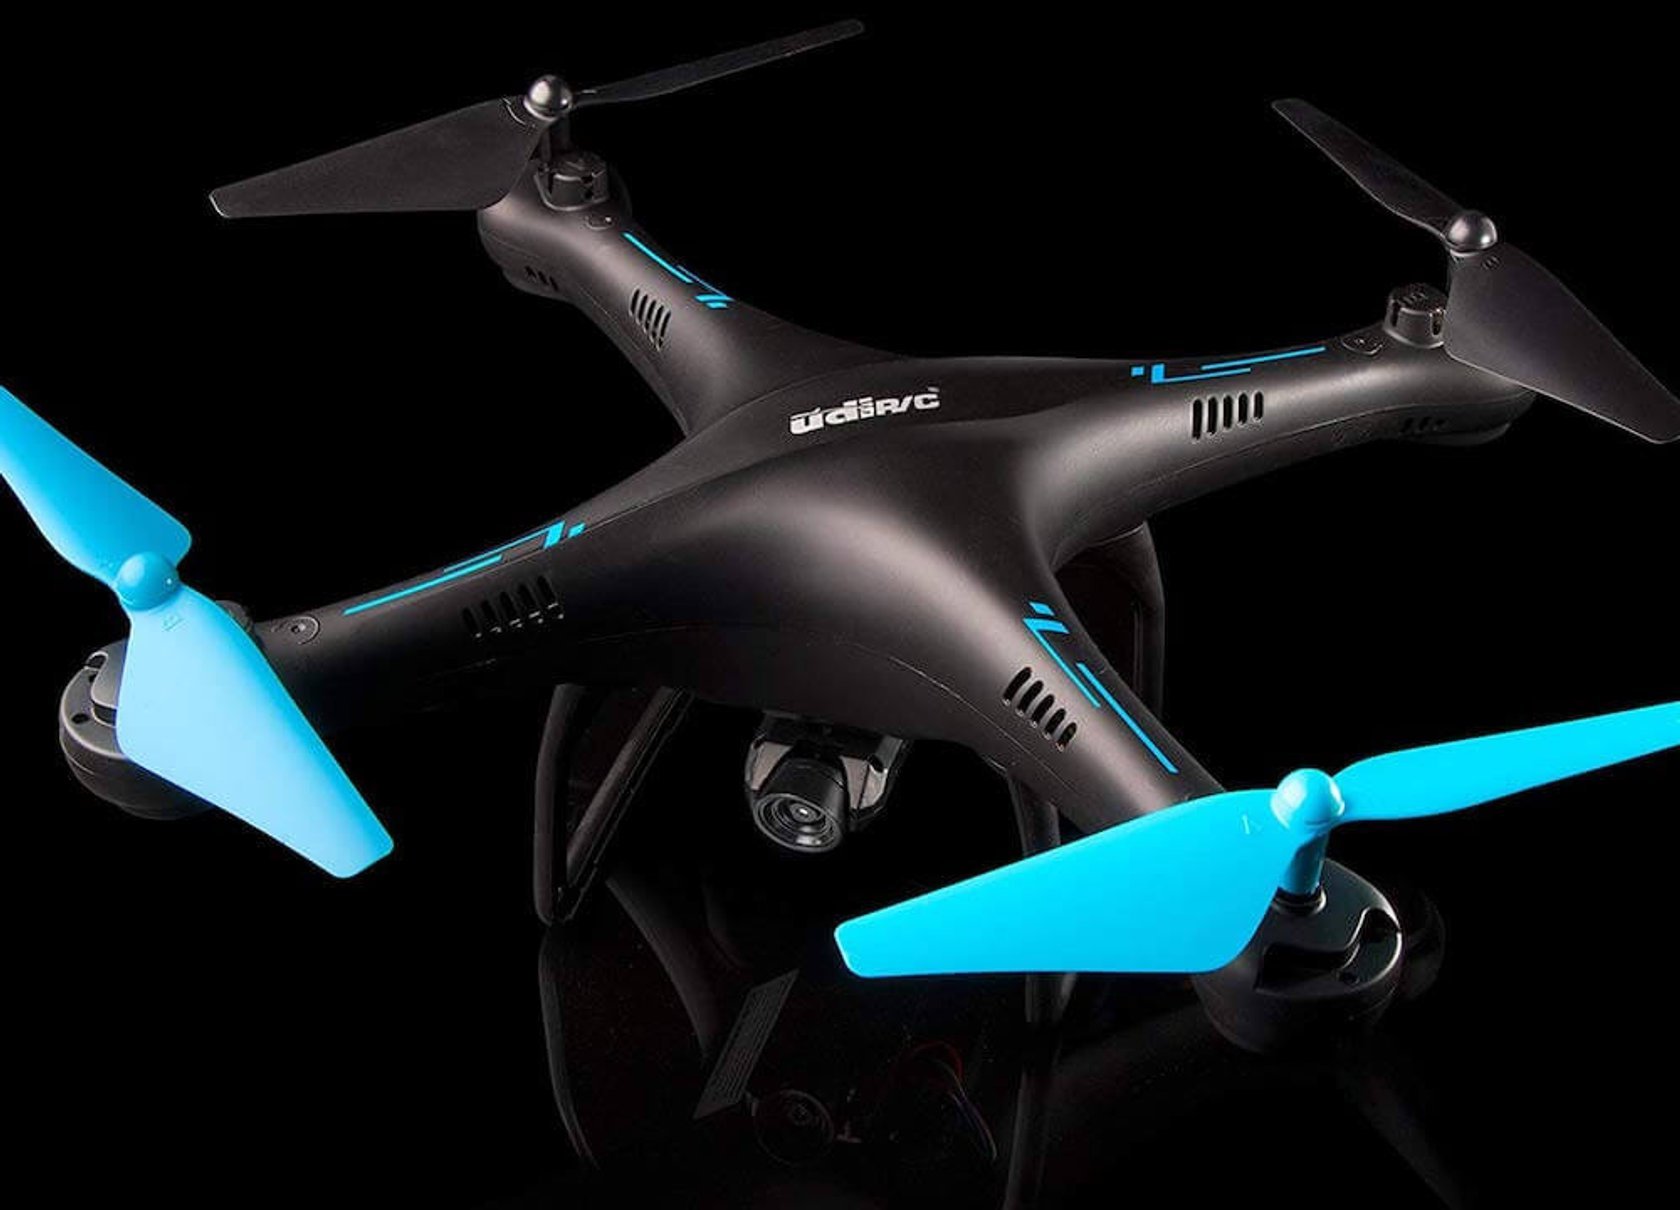 The 15 Best Drones for Professional and Commercial Drone Pilots